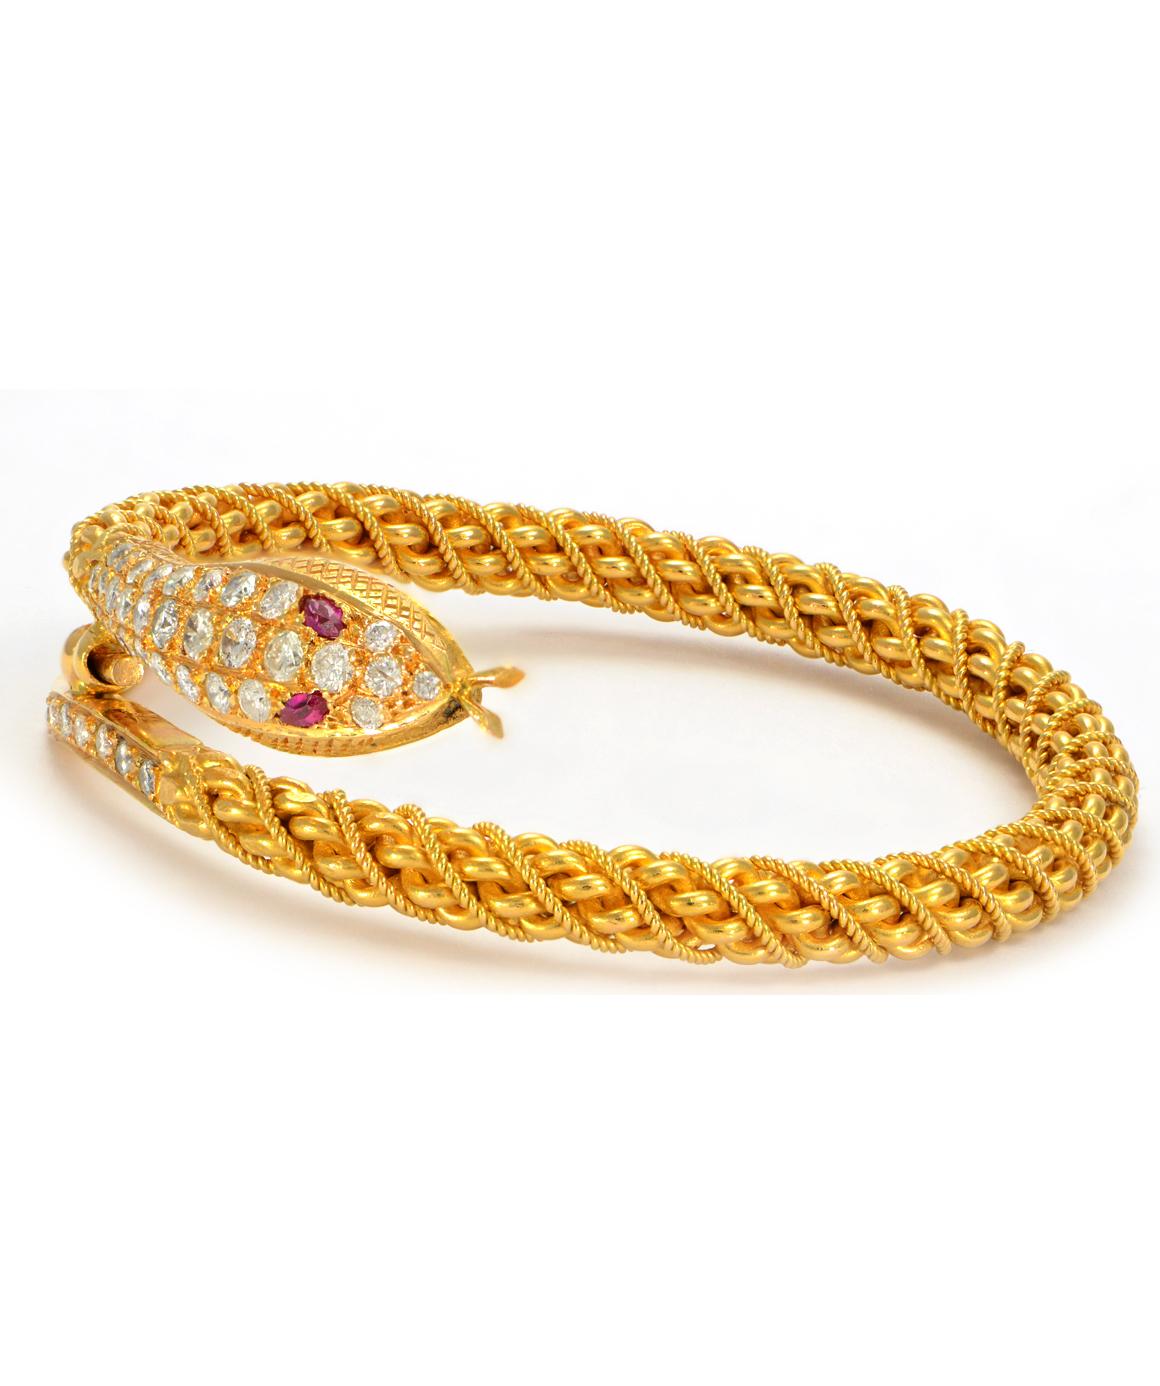 Women's or Men's Solid 22 Karat Gold Textured Snake Bangle with Genuine Diamonds and Ruby 62.2g